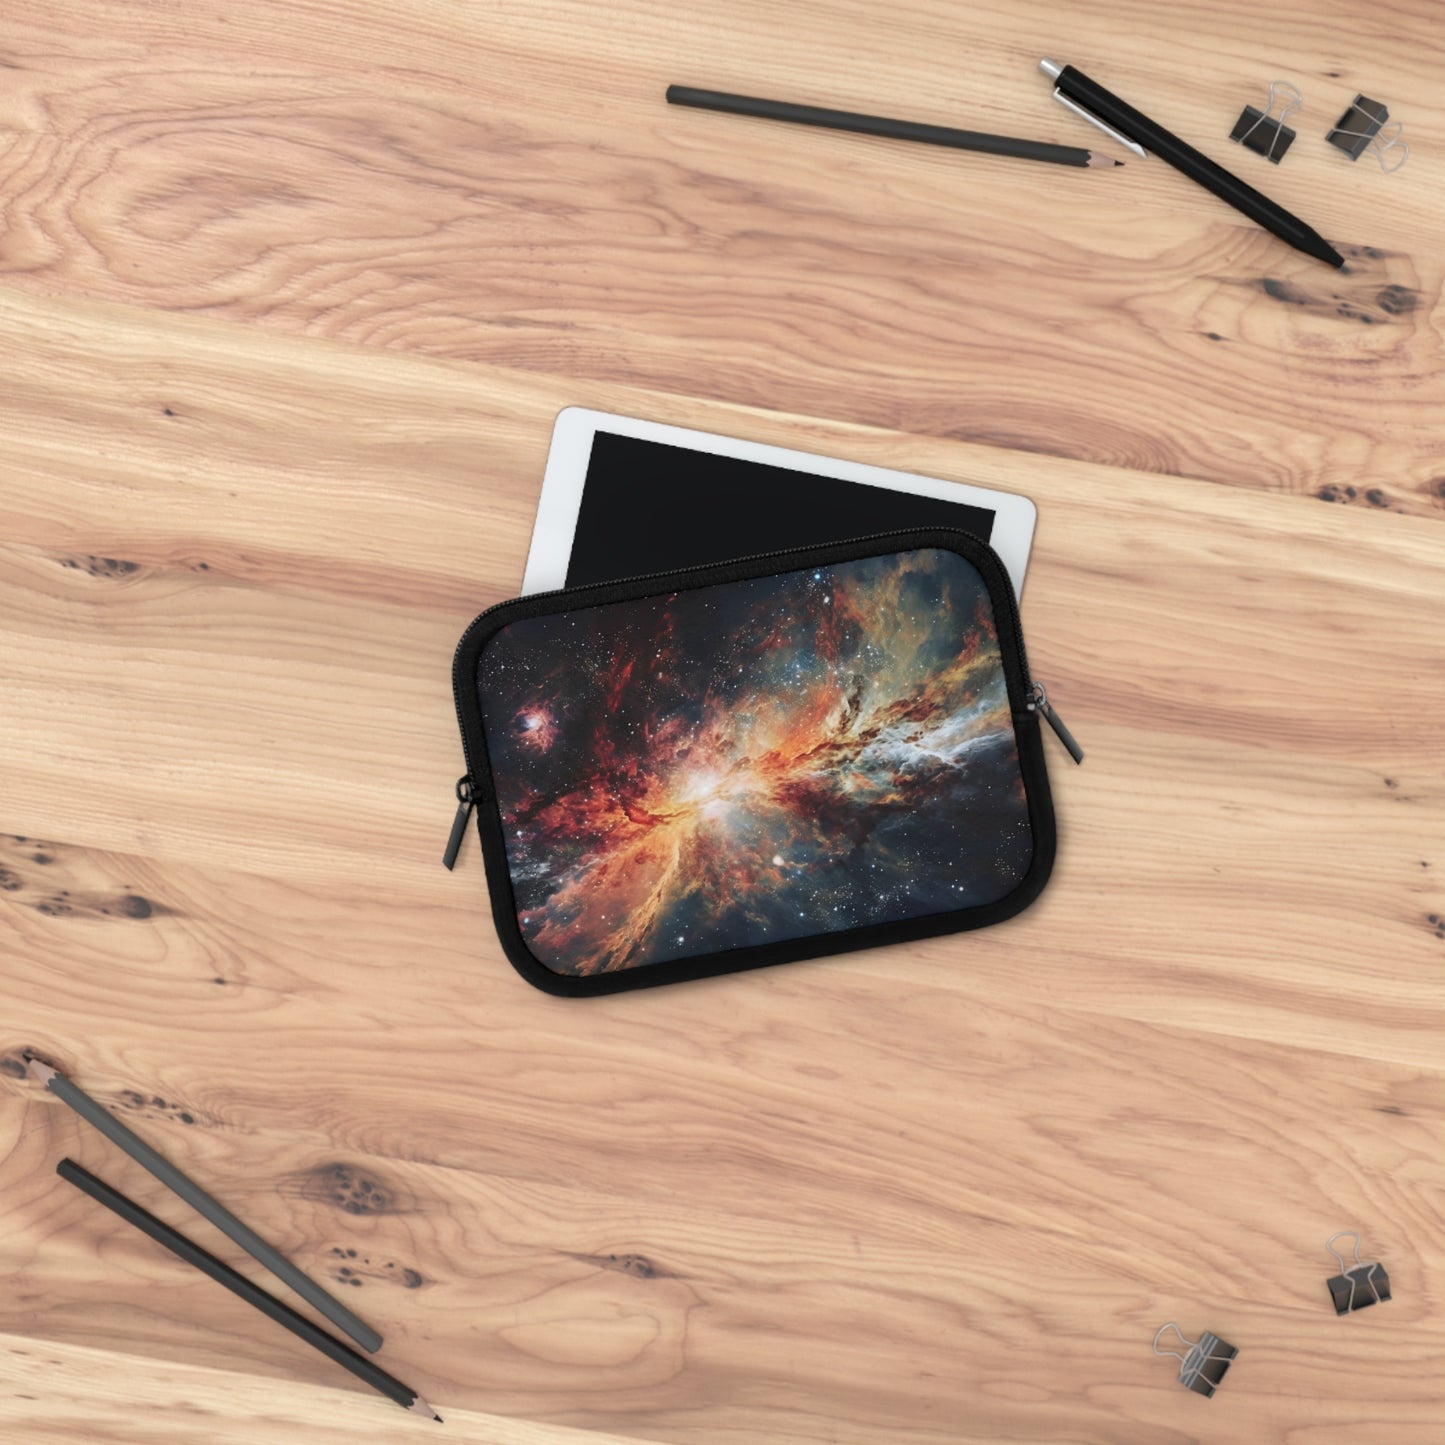 Nebula Laptop Sleeve, Universe Cosmic Tablet Sleeve, Outer Space iPad Cover, Zipper Pouch, Cosmos MacBook Protective Case, Laptop Bag